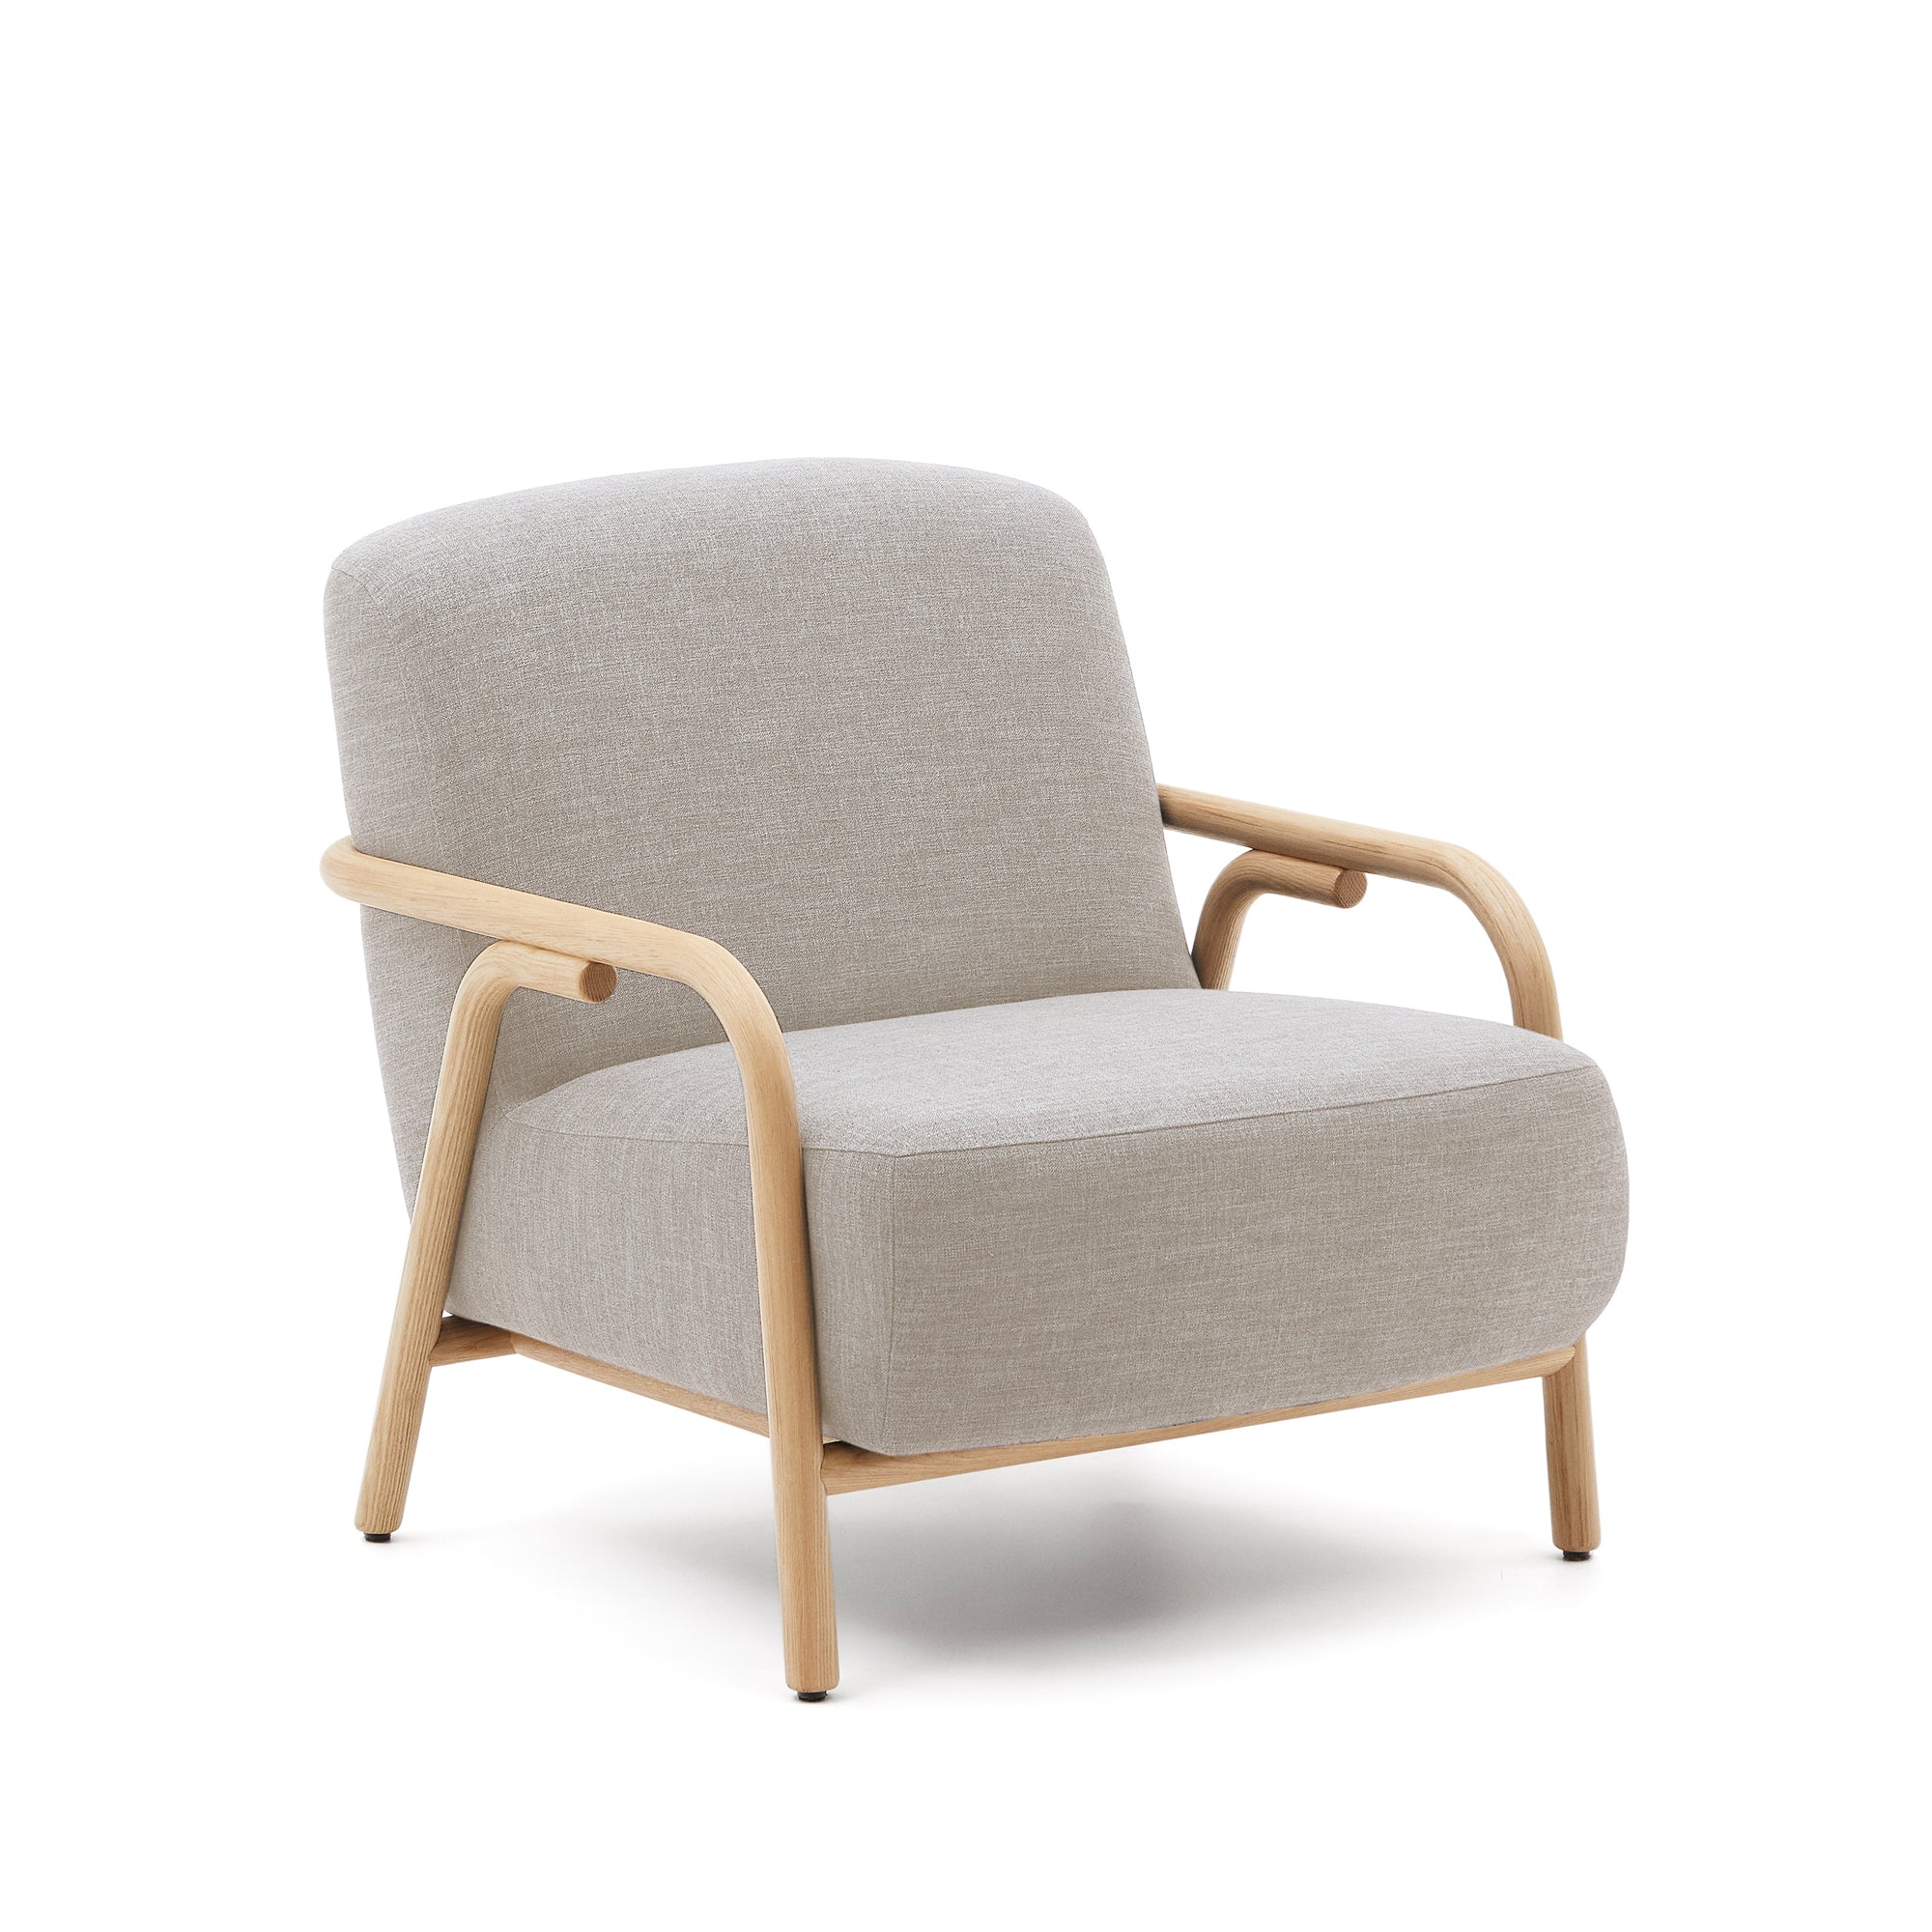 Sylo beige armchair, made of solid ash wood, 100% FSC